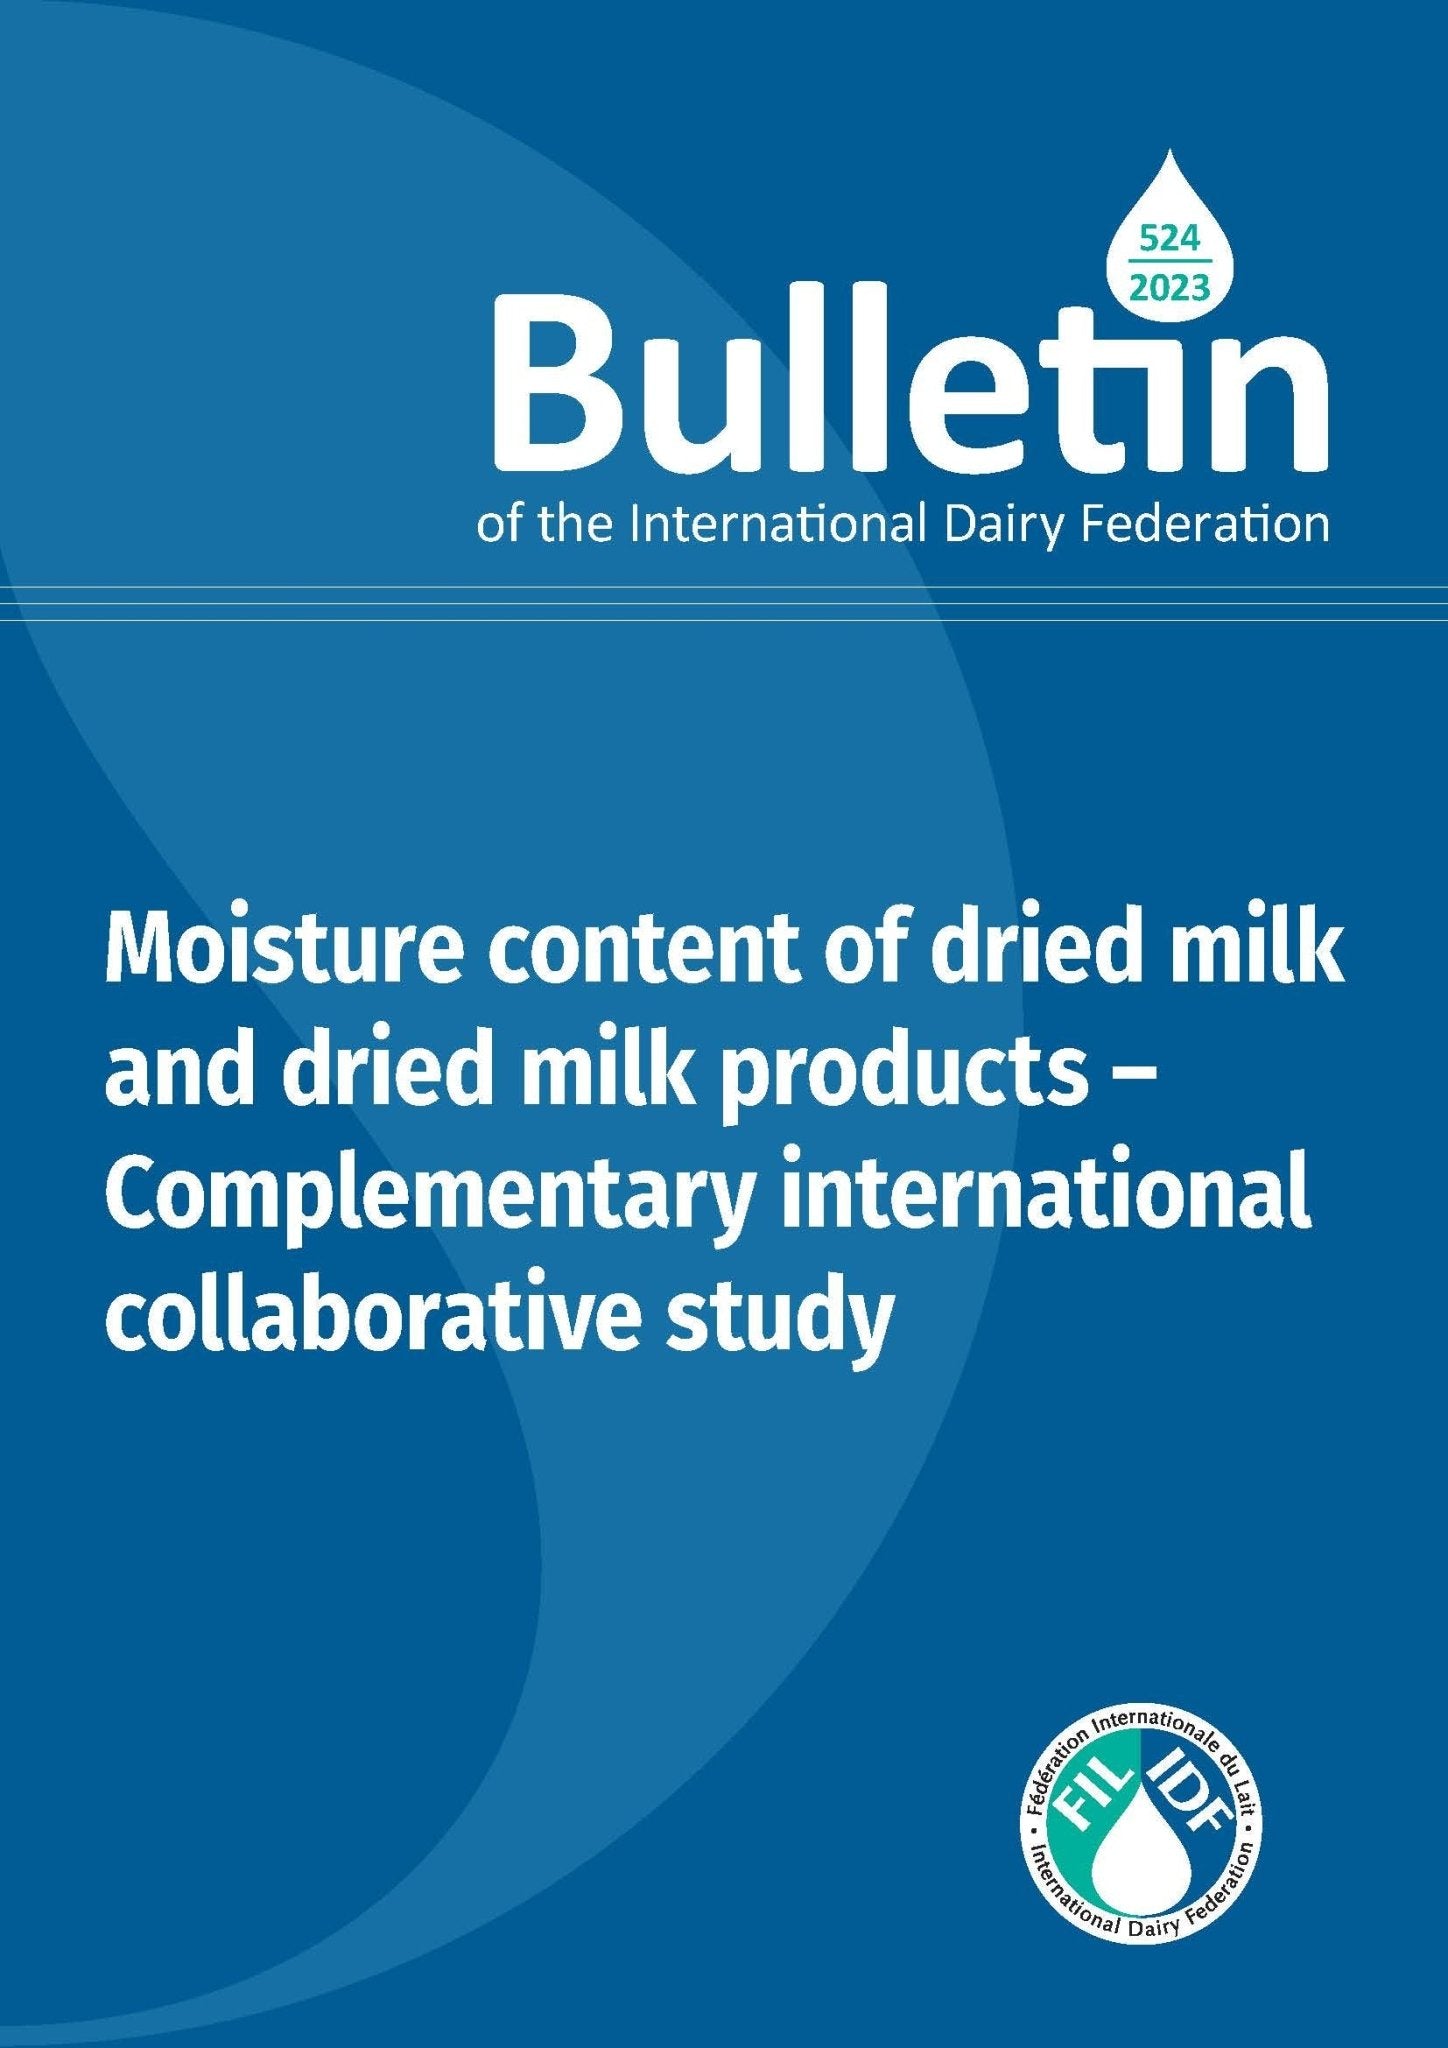 Bulletin of the IDF N° 524/2023: Moisture content of dried milk and dried milk products – Complementary international collaborative study - FIL-IDF